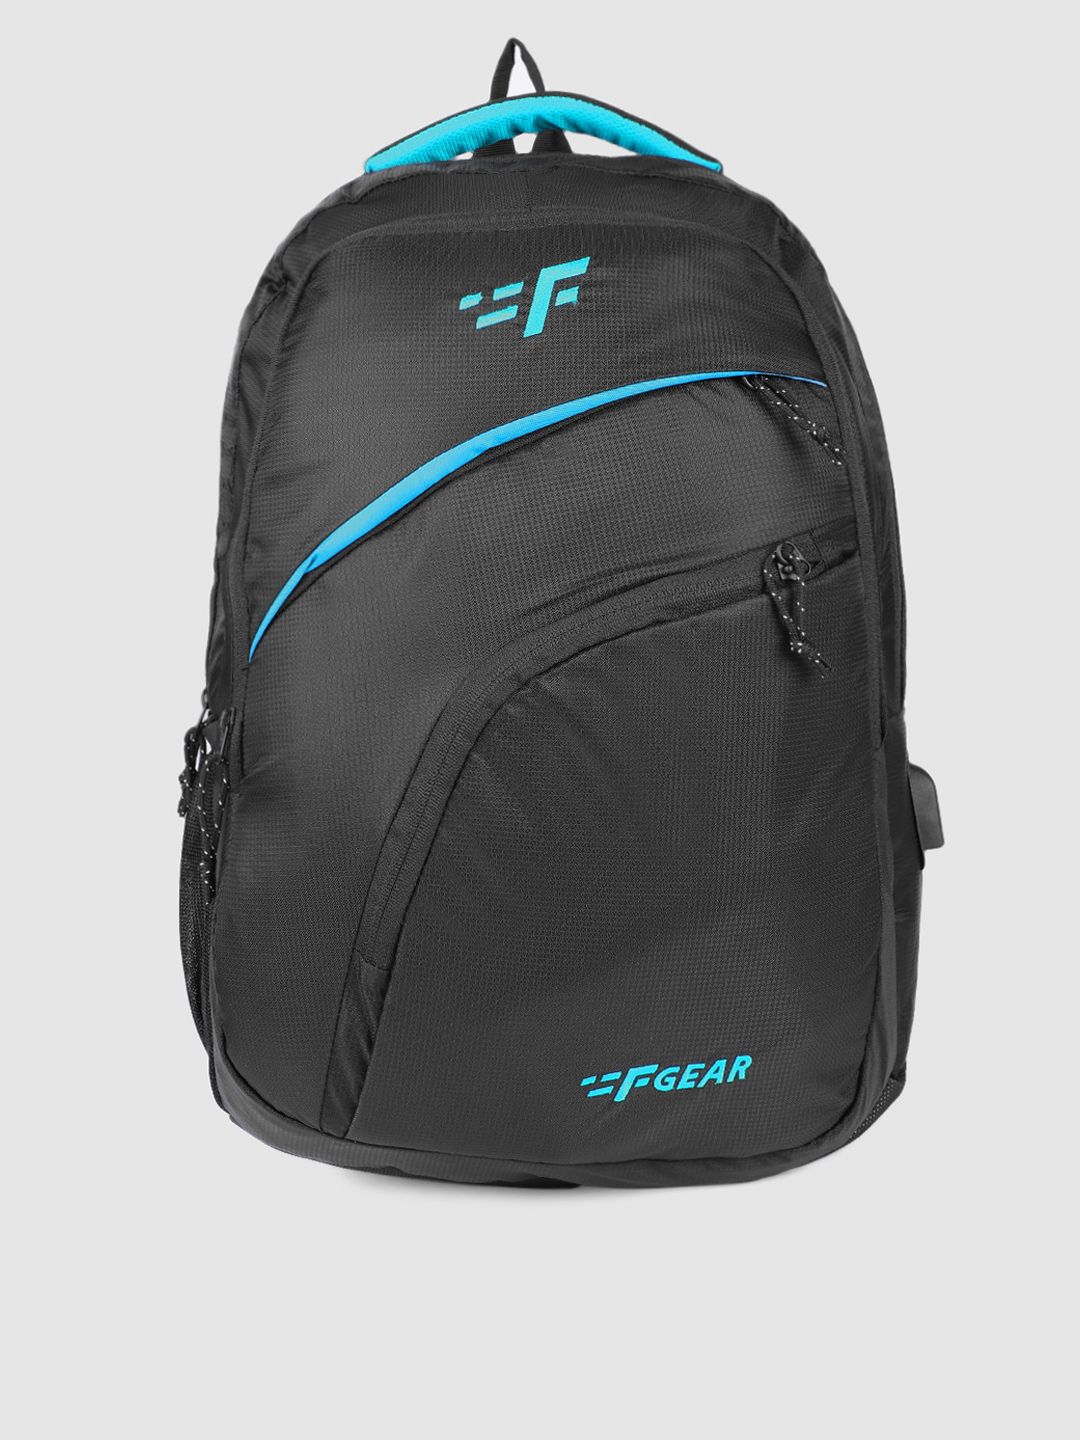 F Gear Unisex Black & Black Solid Backpack Price in India